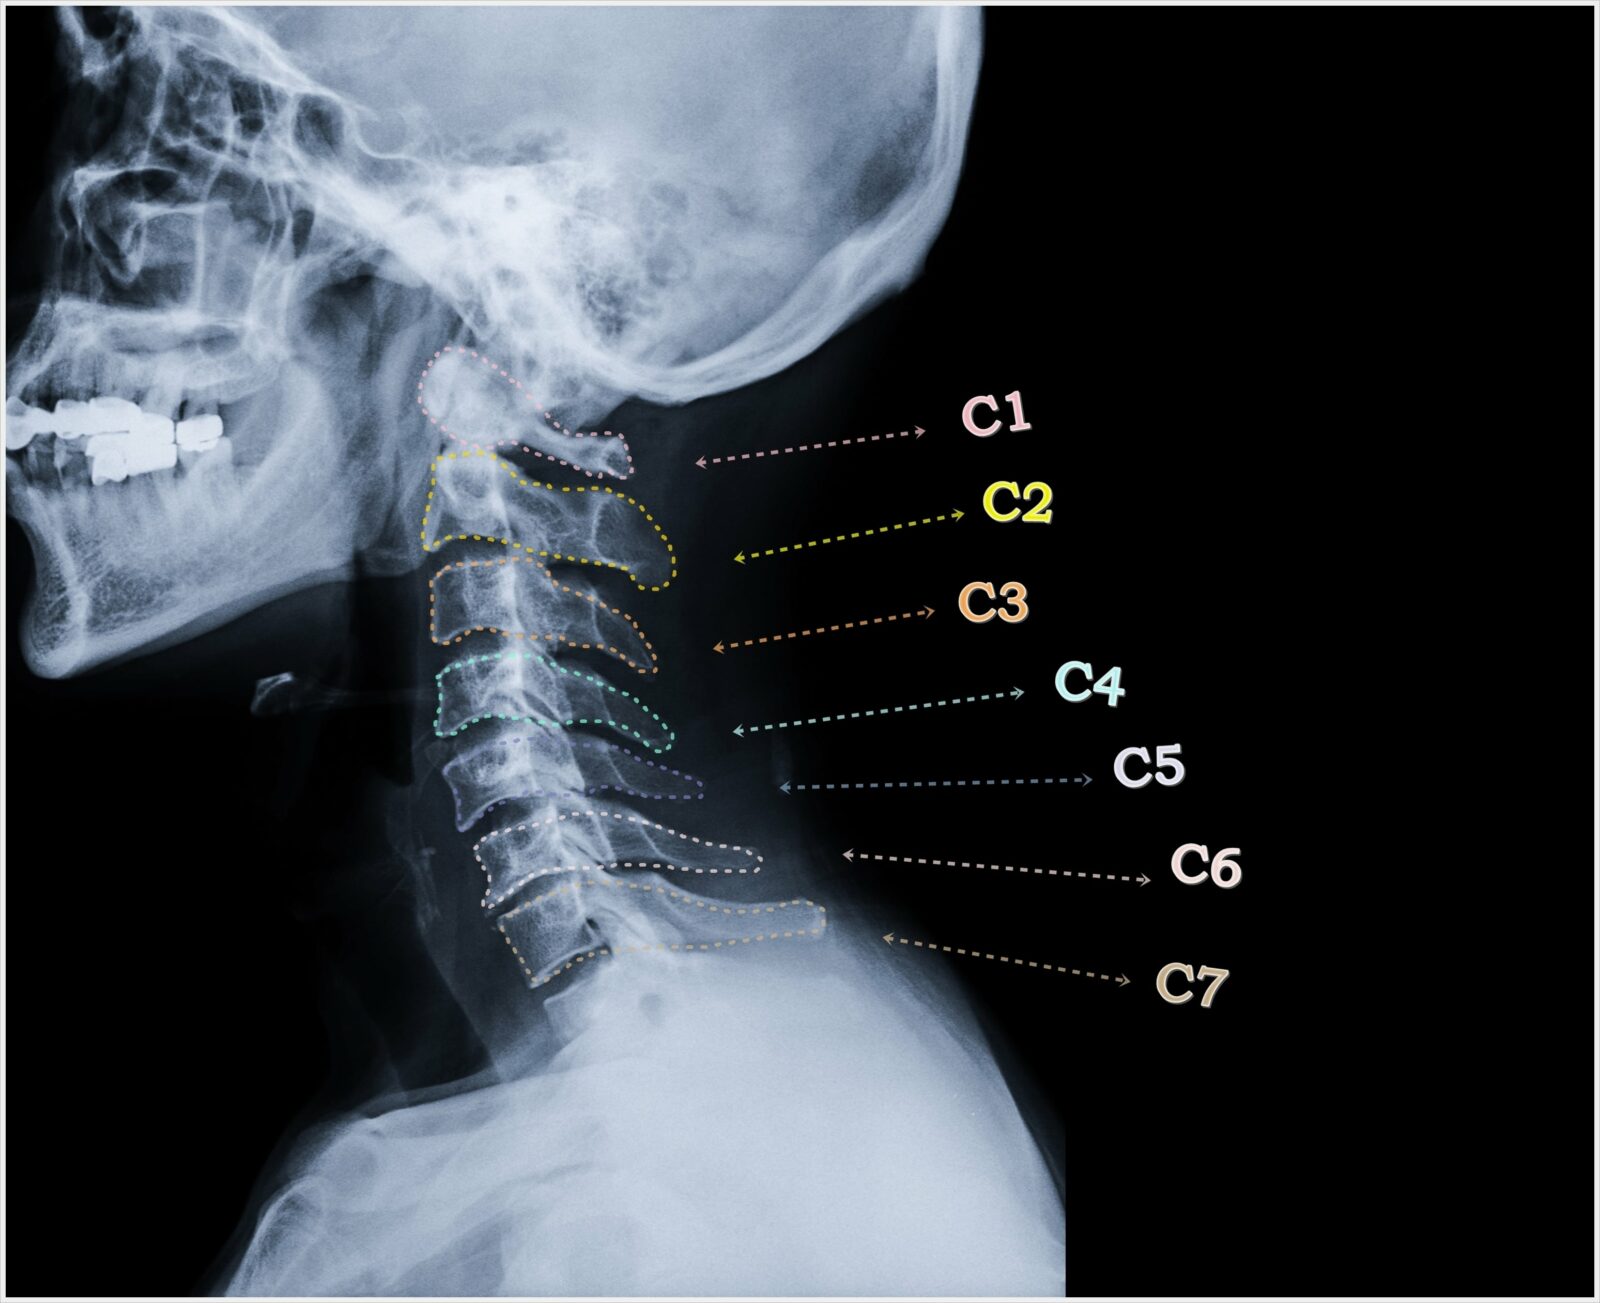 x-ray view of cervical spine